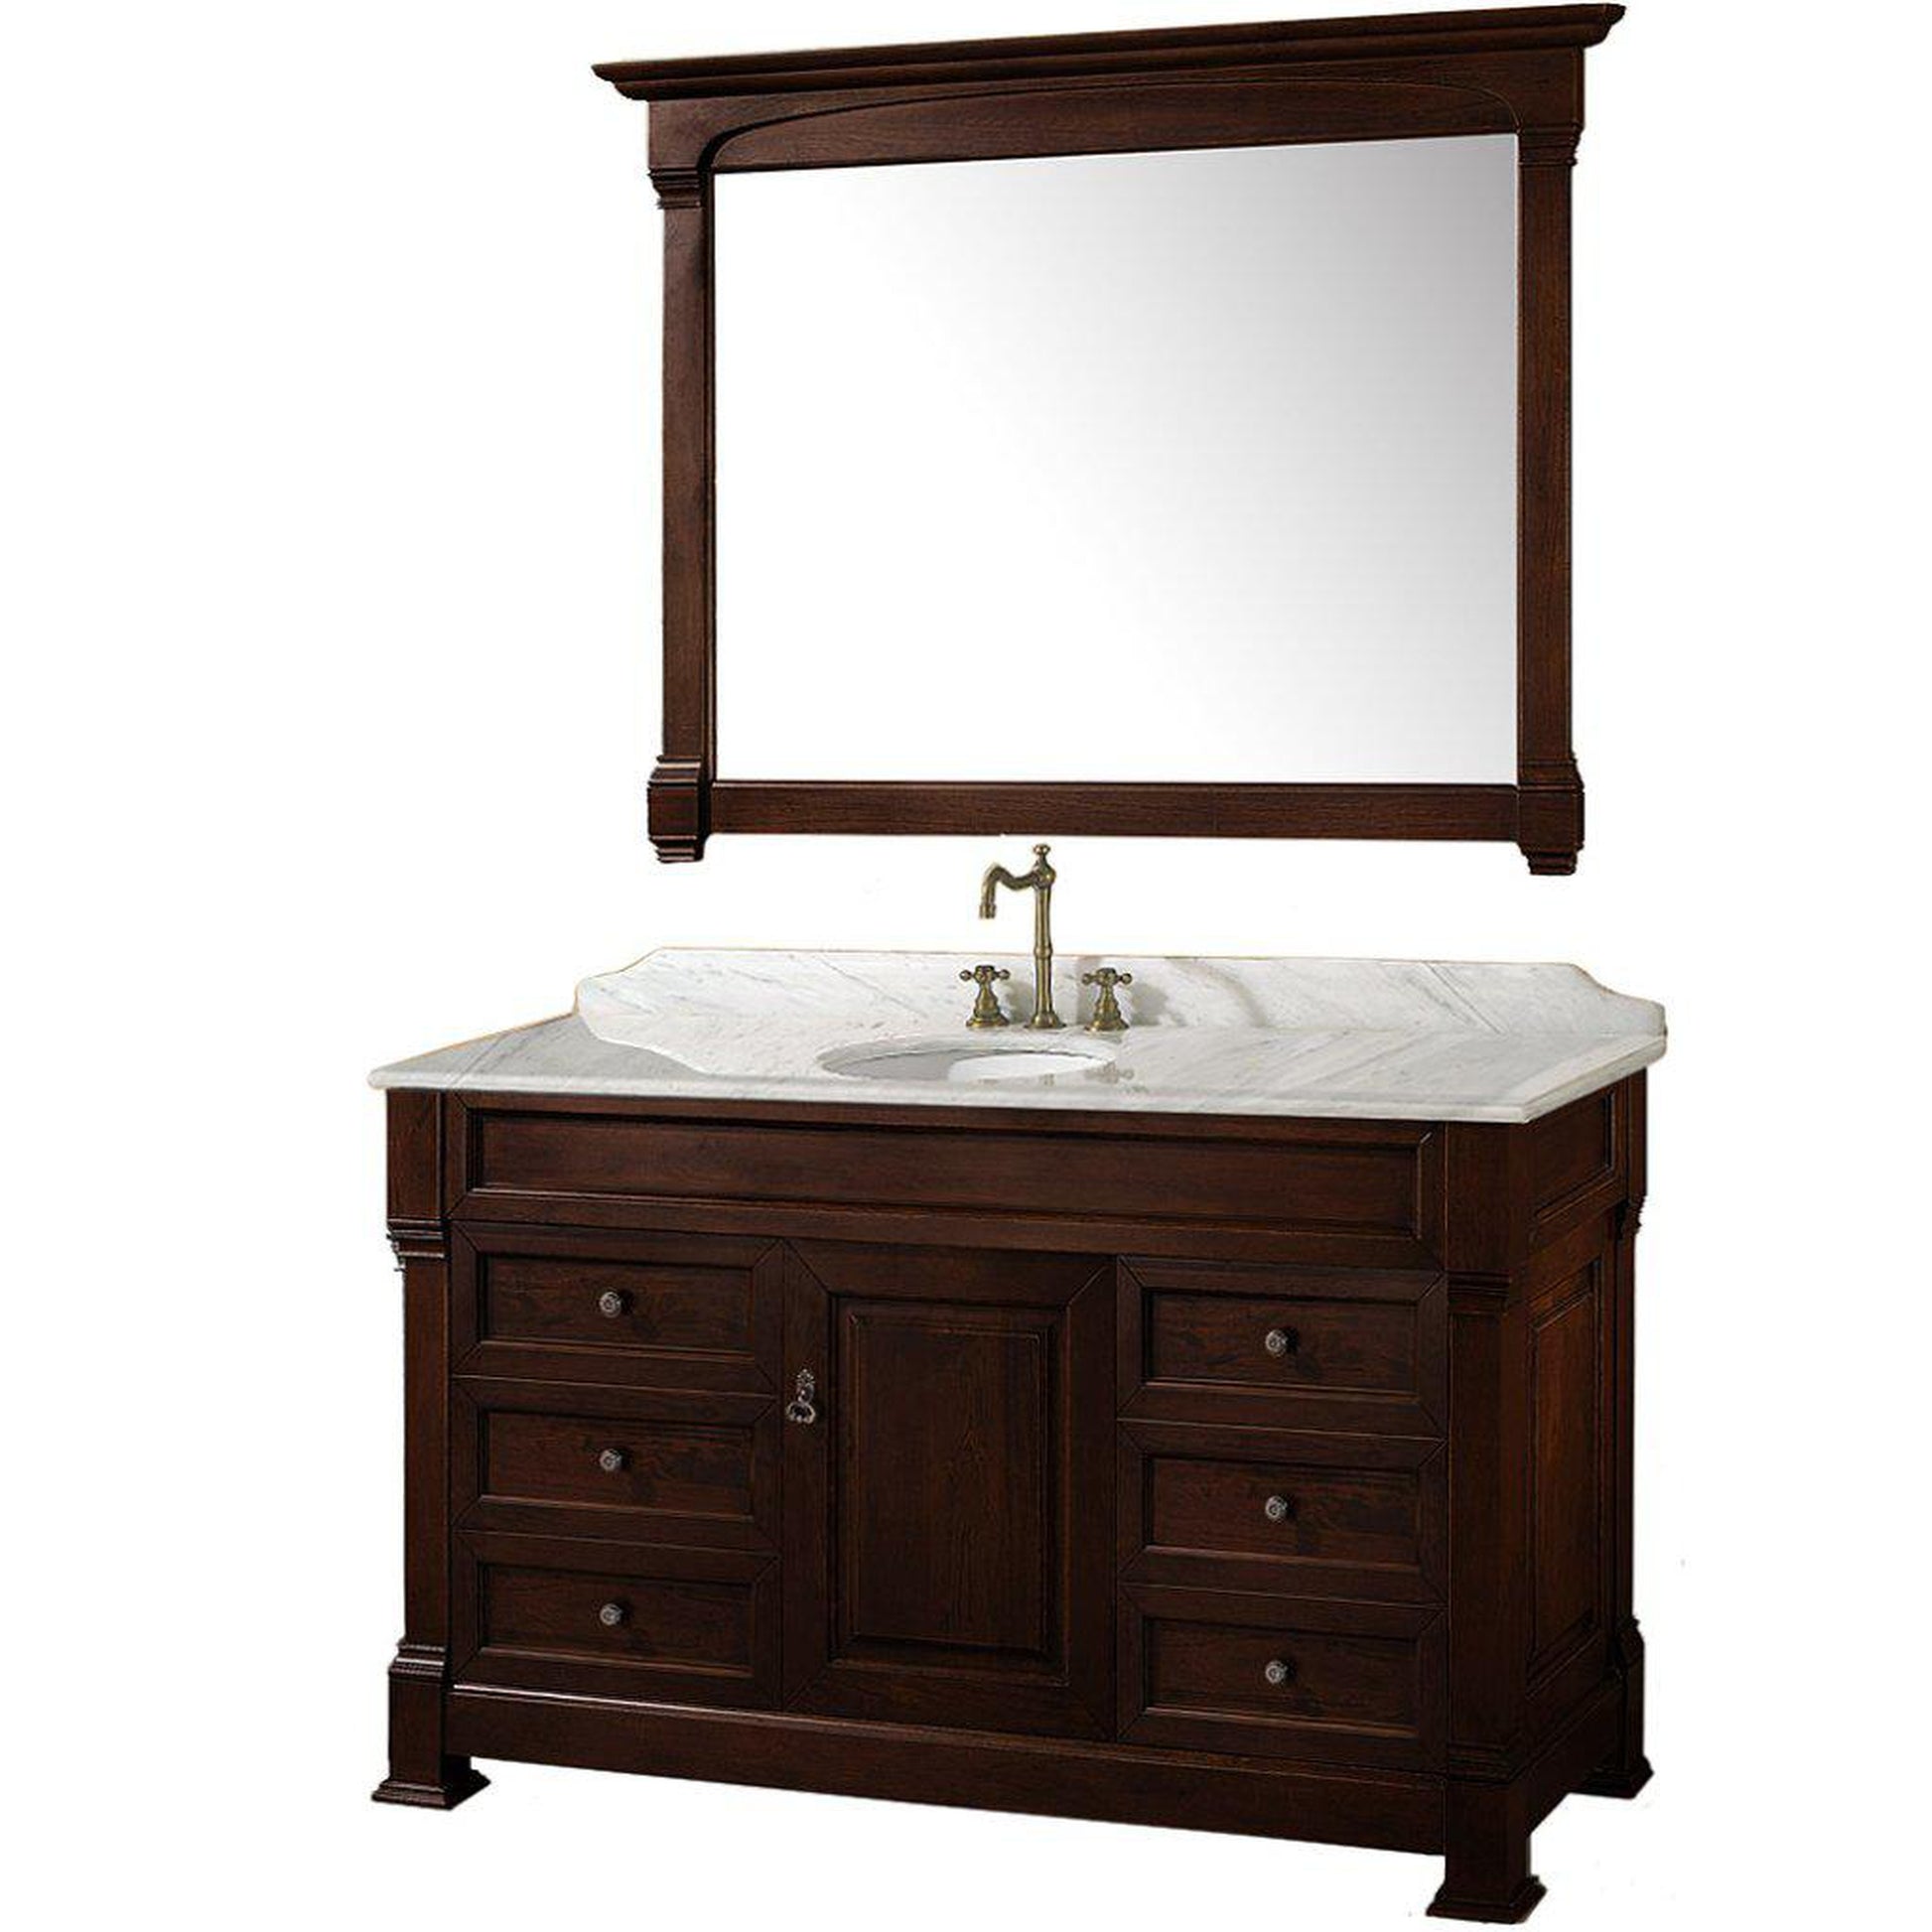 Wyndham Collection Andover 55" Single Bathroom Dark Cherry Vanity Set With White Carrara Marble Countertop And Undermount Oval Sink, And 50" Mirror